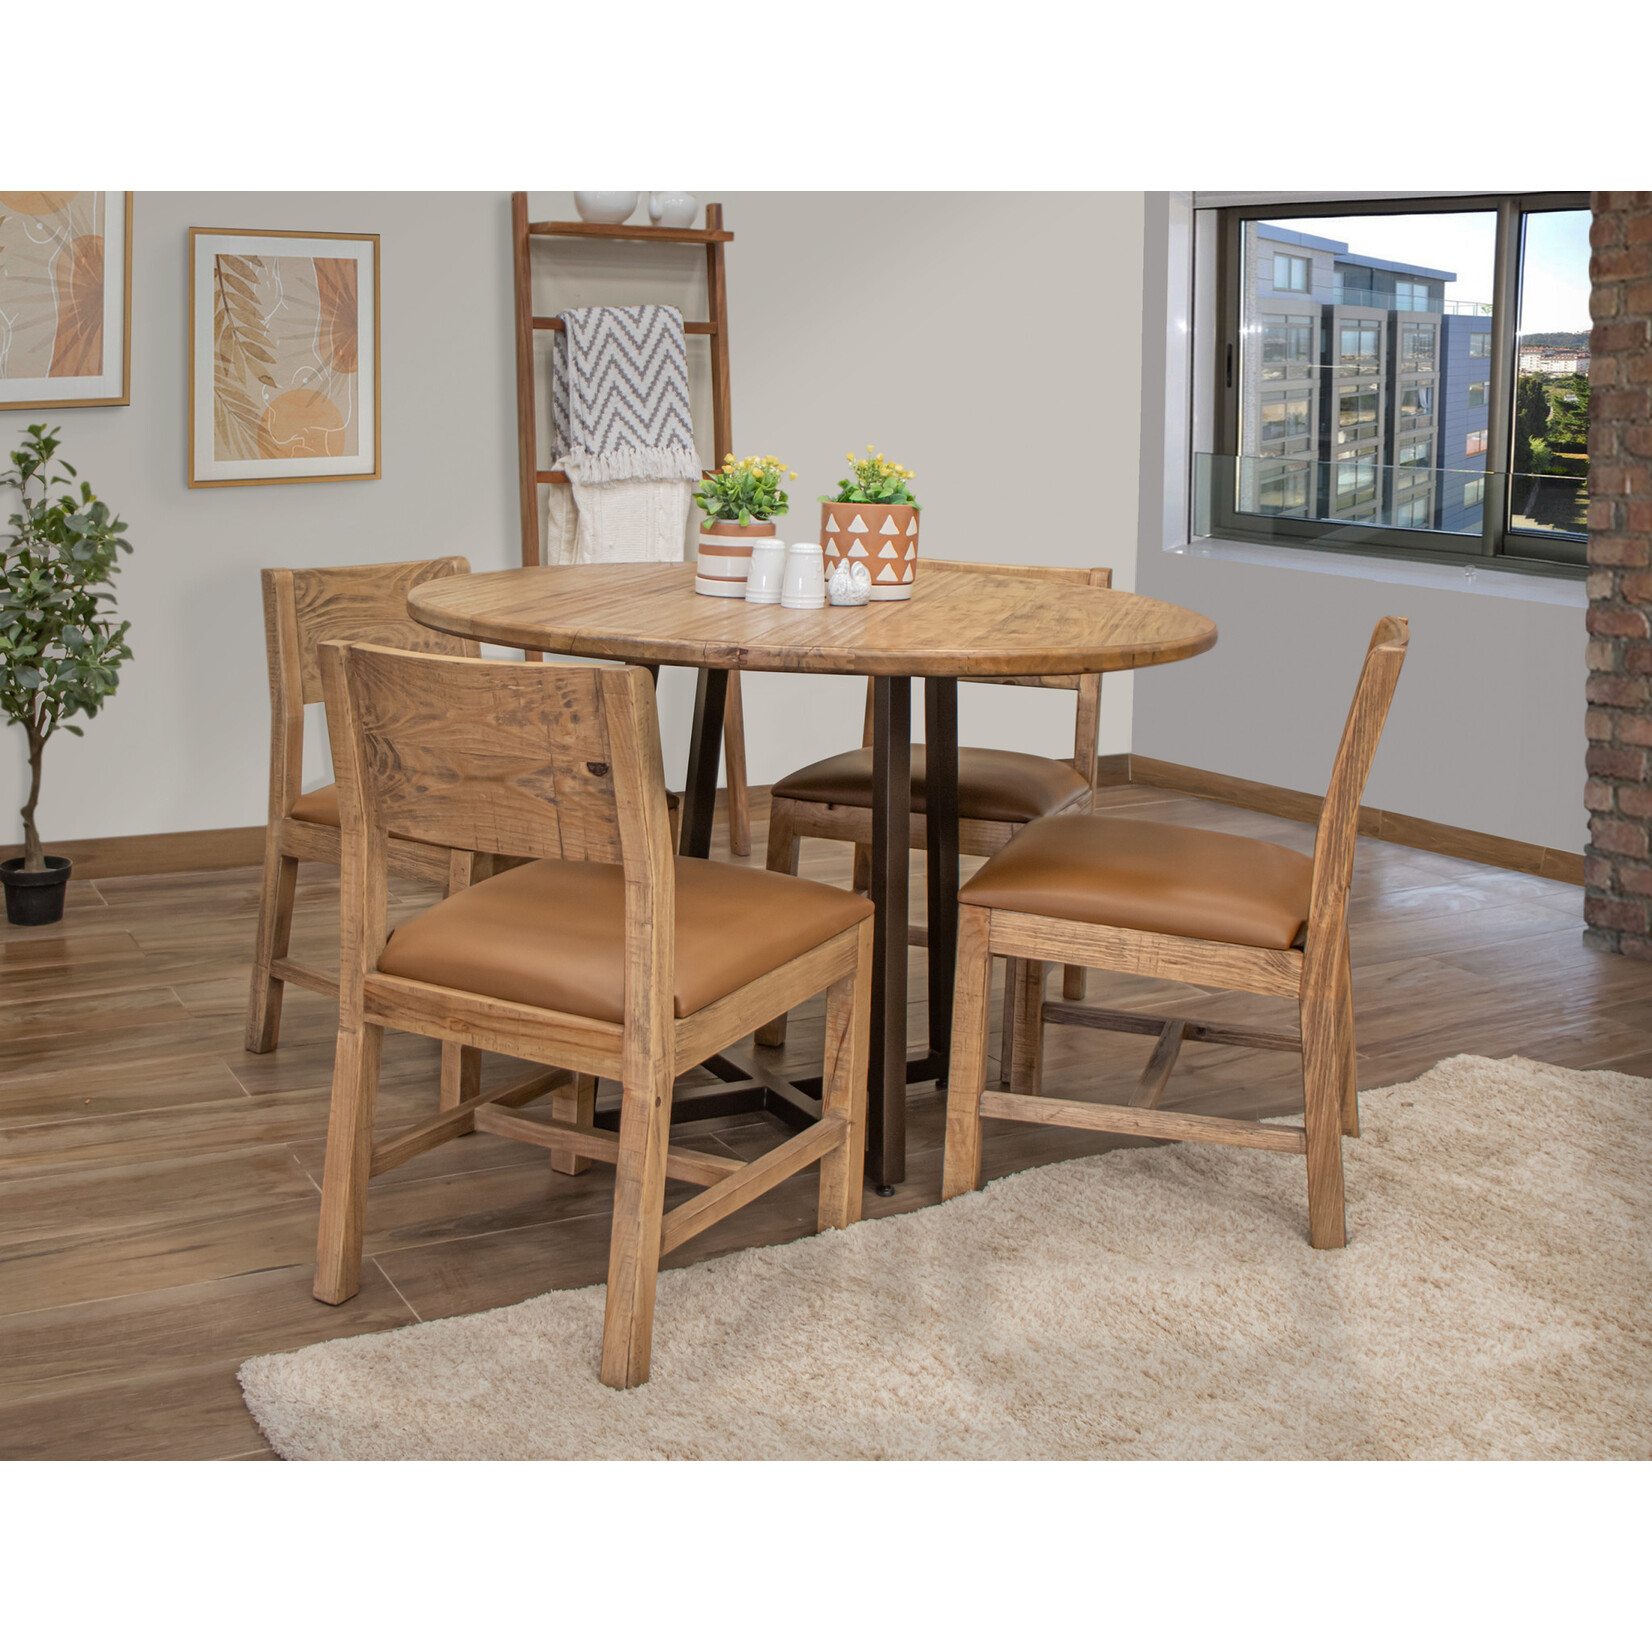 Tulum Round Dining Table and 4 Chairs